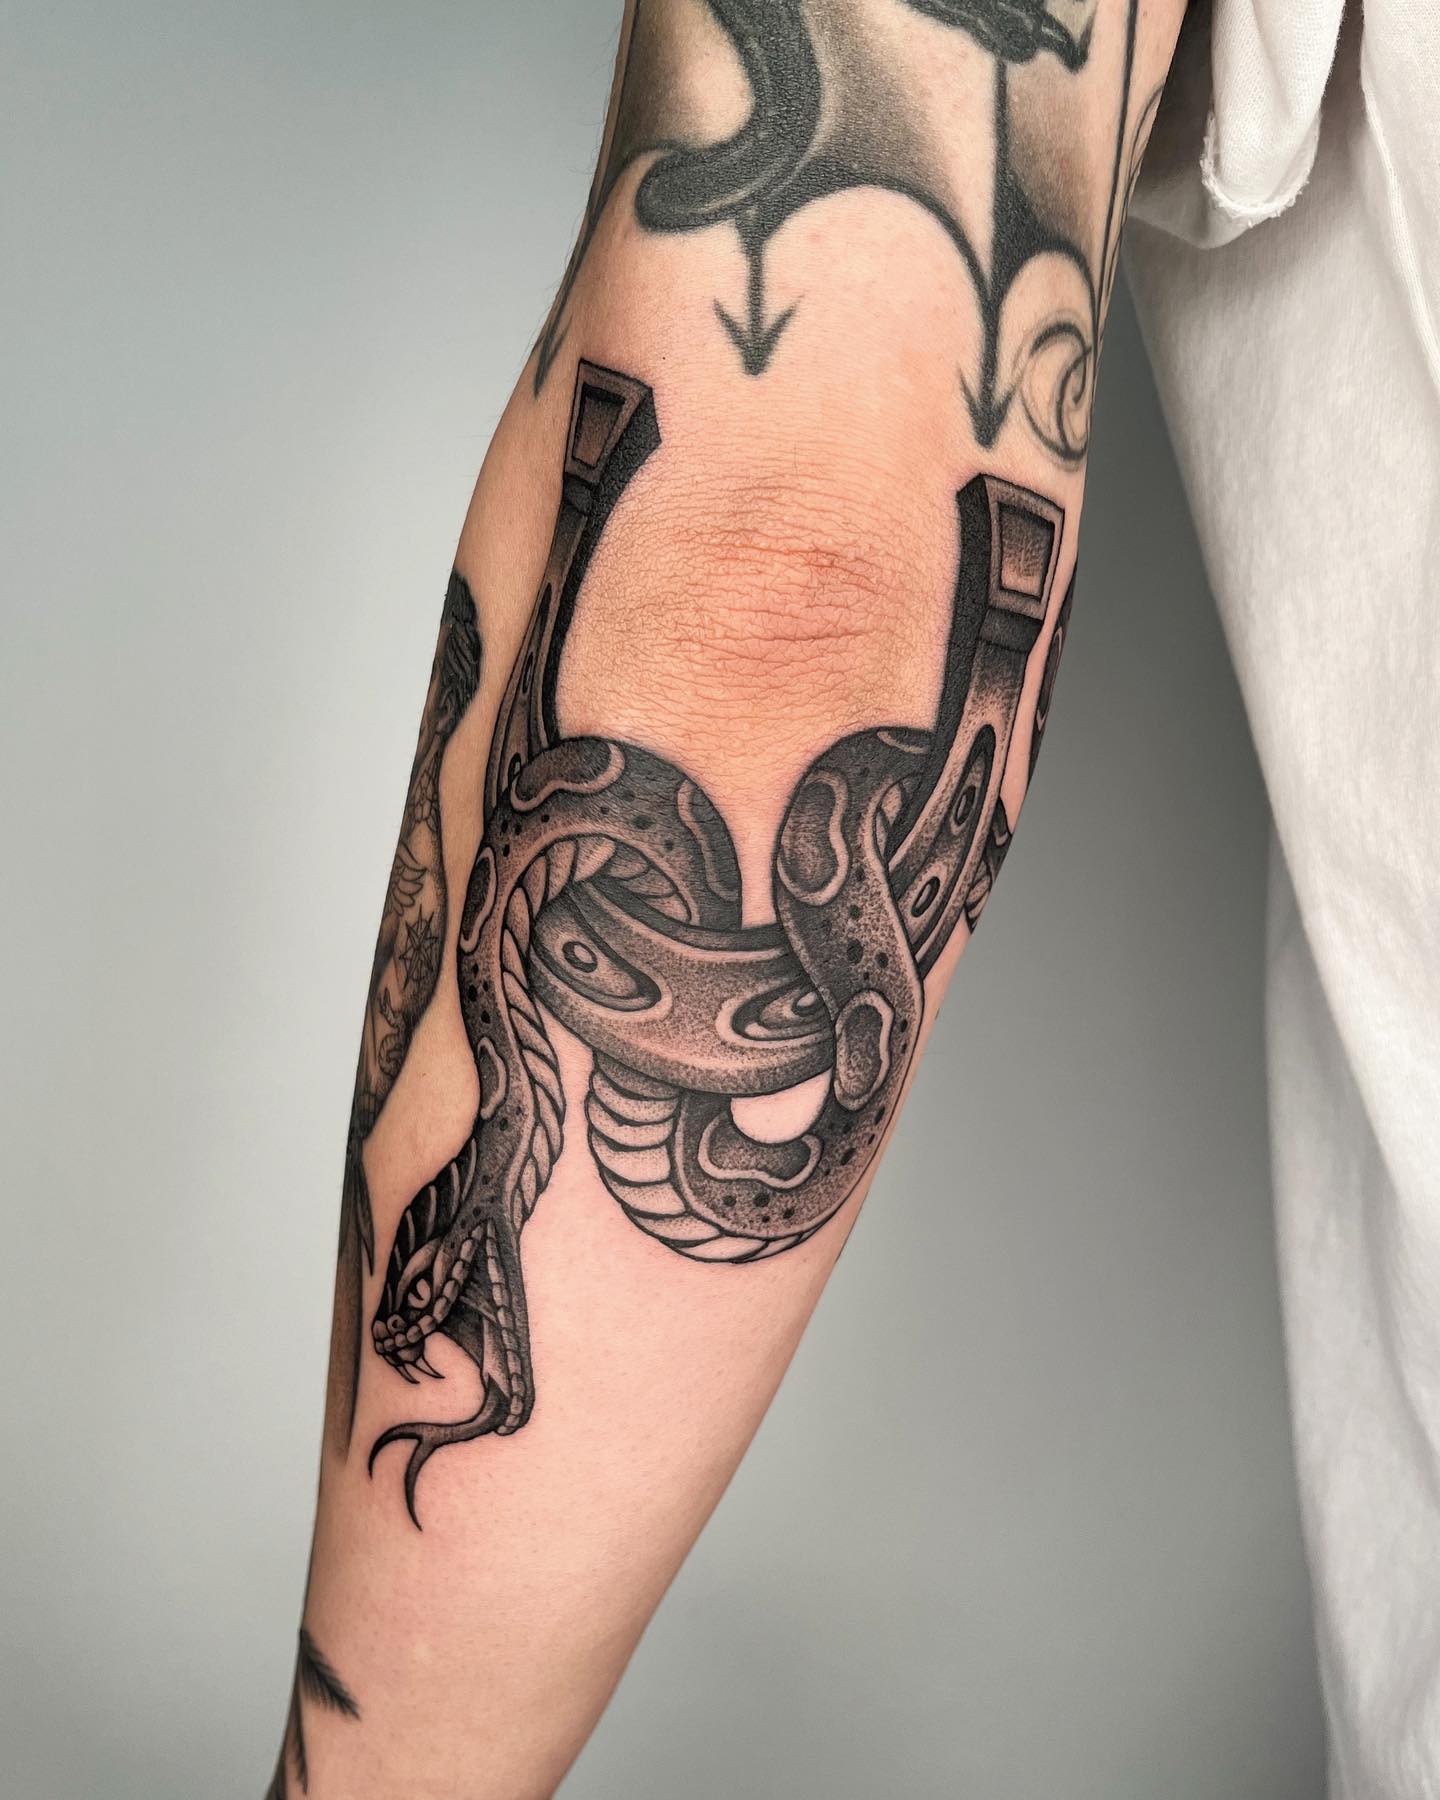 A black snake placed on your elbow is going to look fun and scary. If you’re someone who likes animals and you think that they can symbolize your spirit and character, book this print. In the end, it can stand for any fears that you may have worked on.